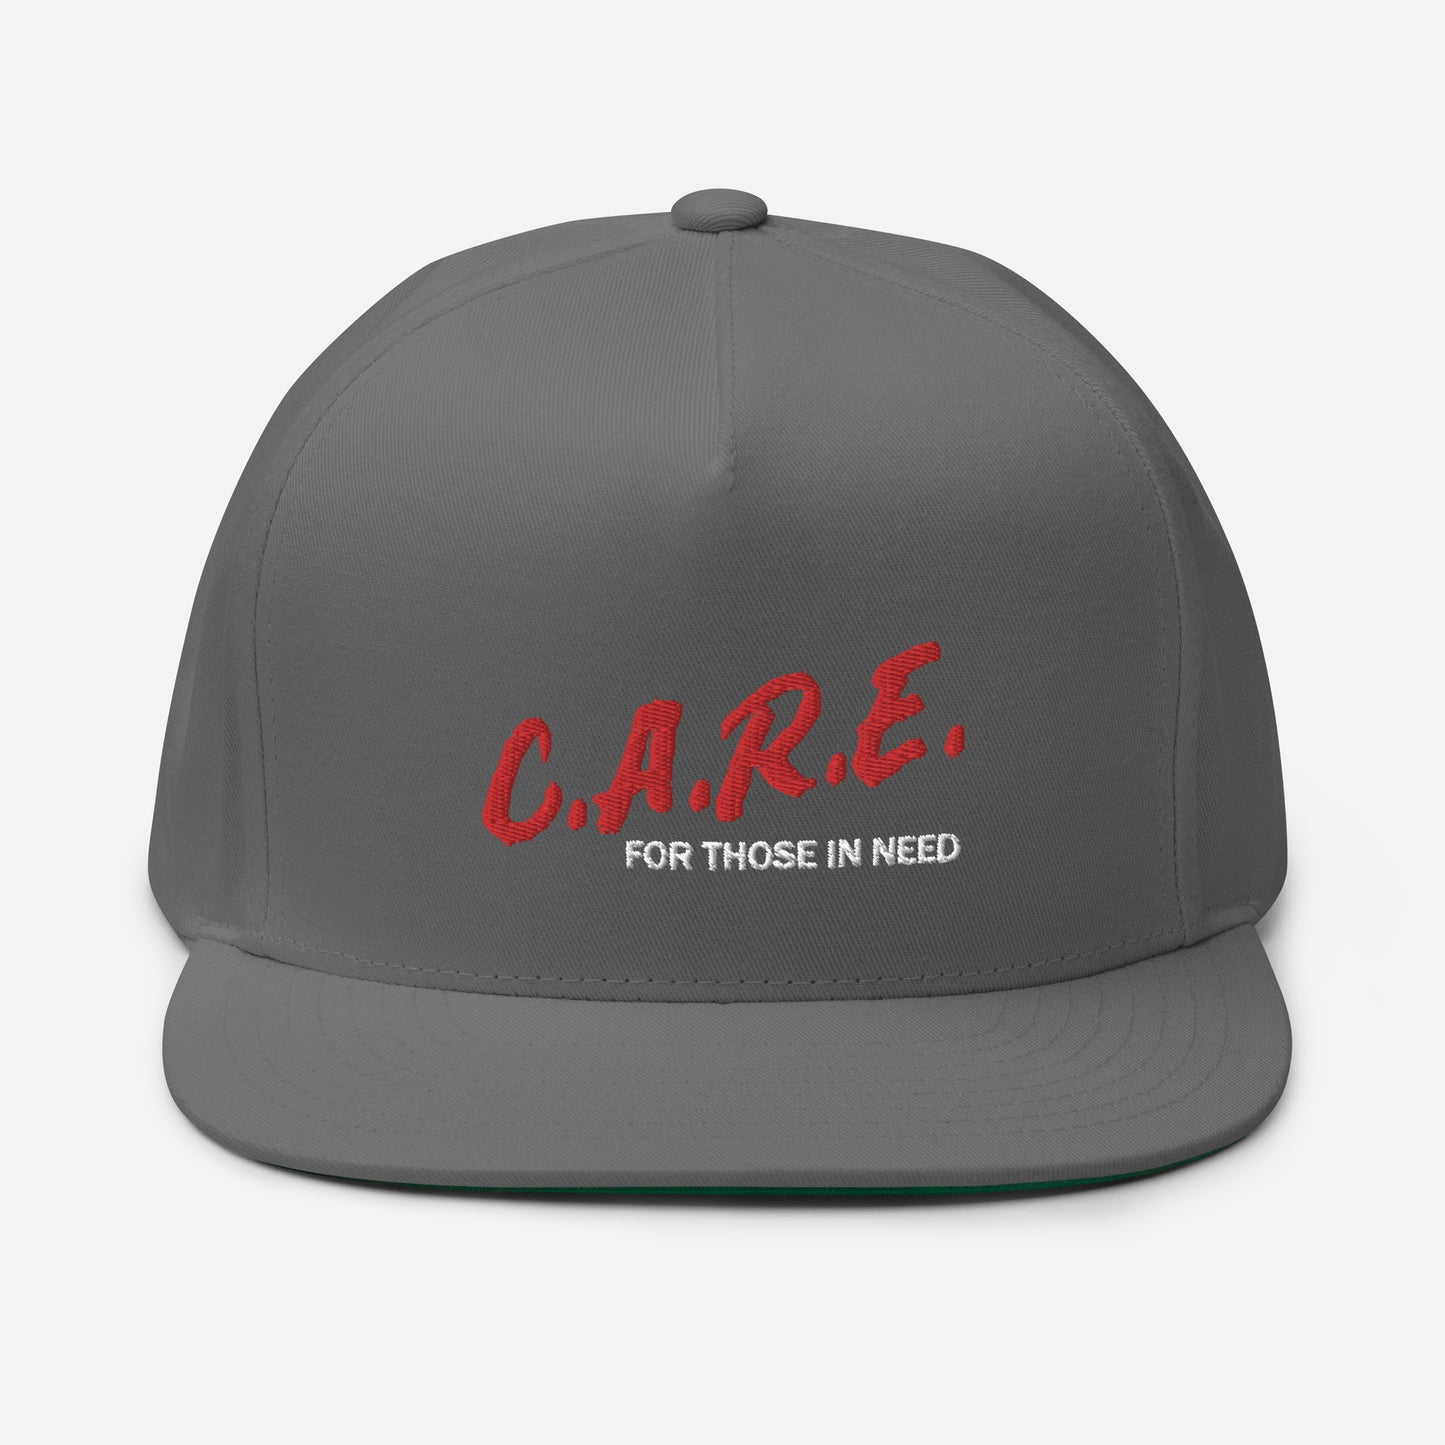 Care...For Those in Need Flat Bill Cap